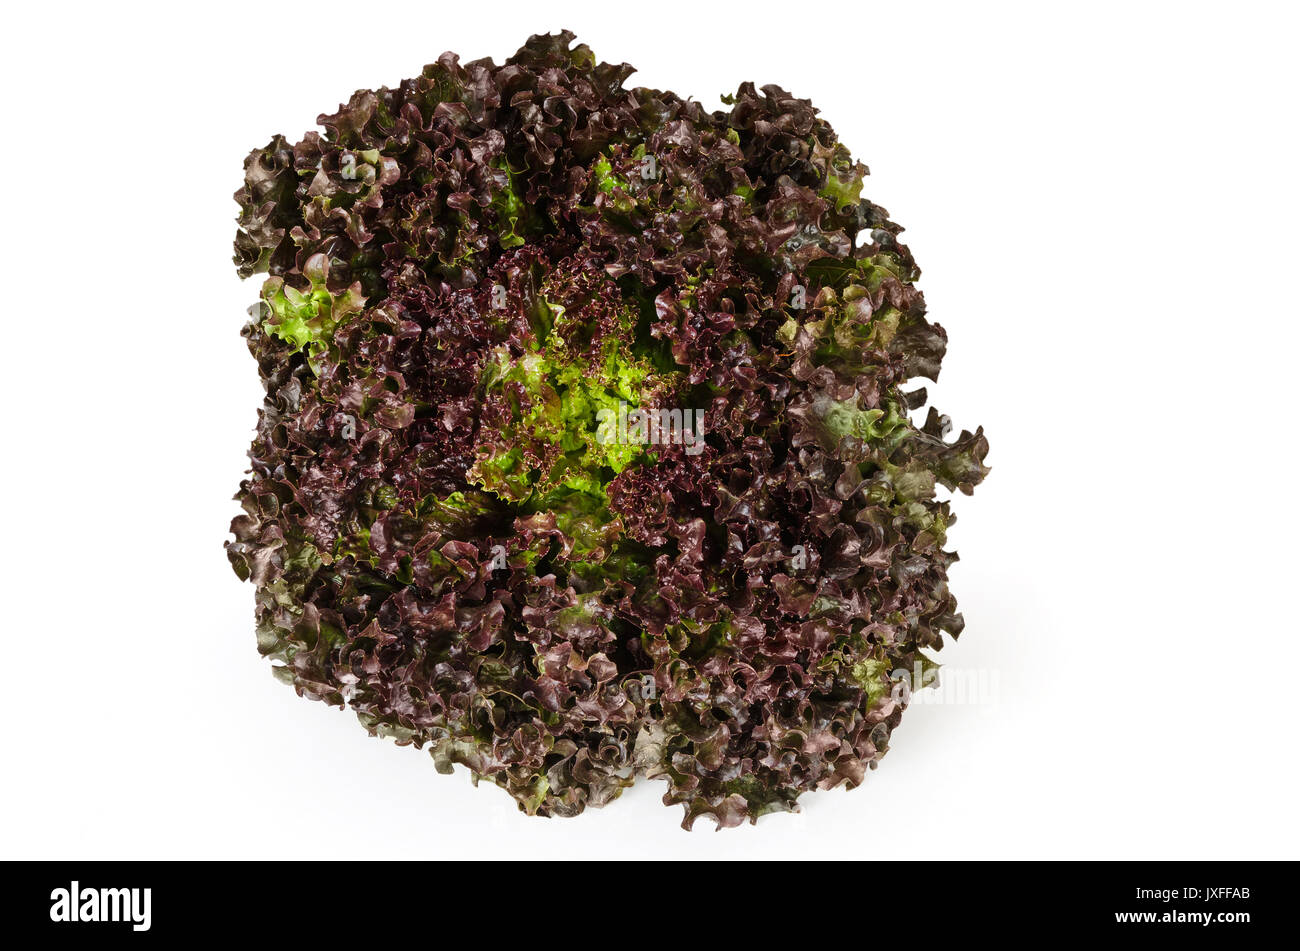 Lollo Rosso lettuce front view on white background. A summer crisp variety of Lactuca sativa. Red loose leaf type salad head with frilly leafs. Photo. Stock Photo